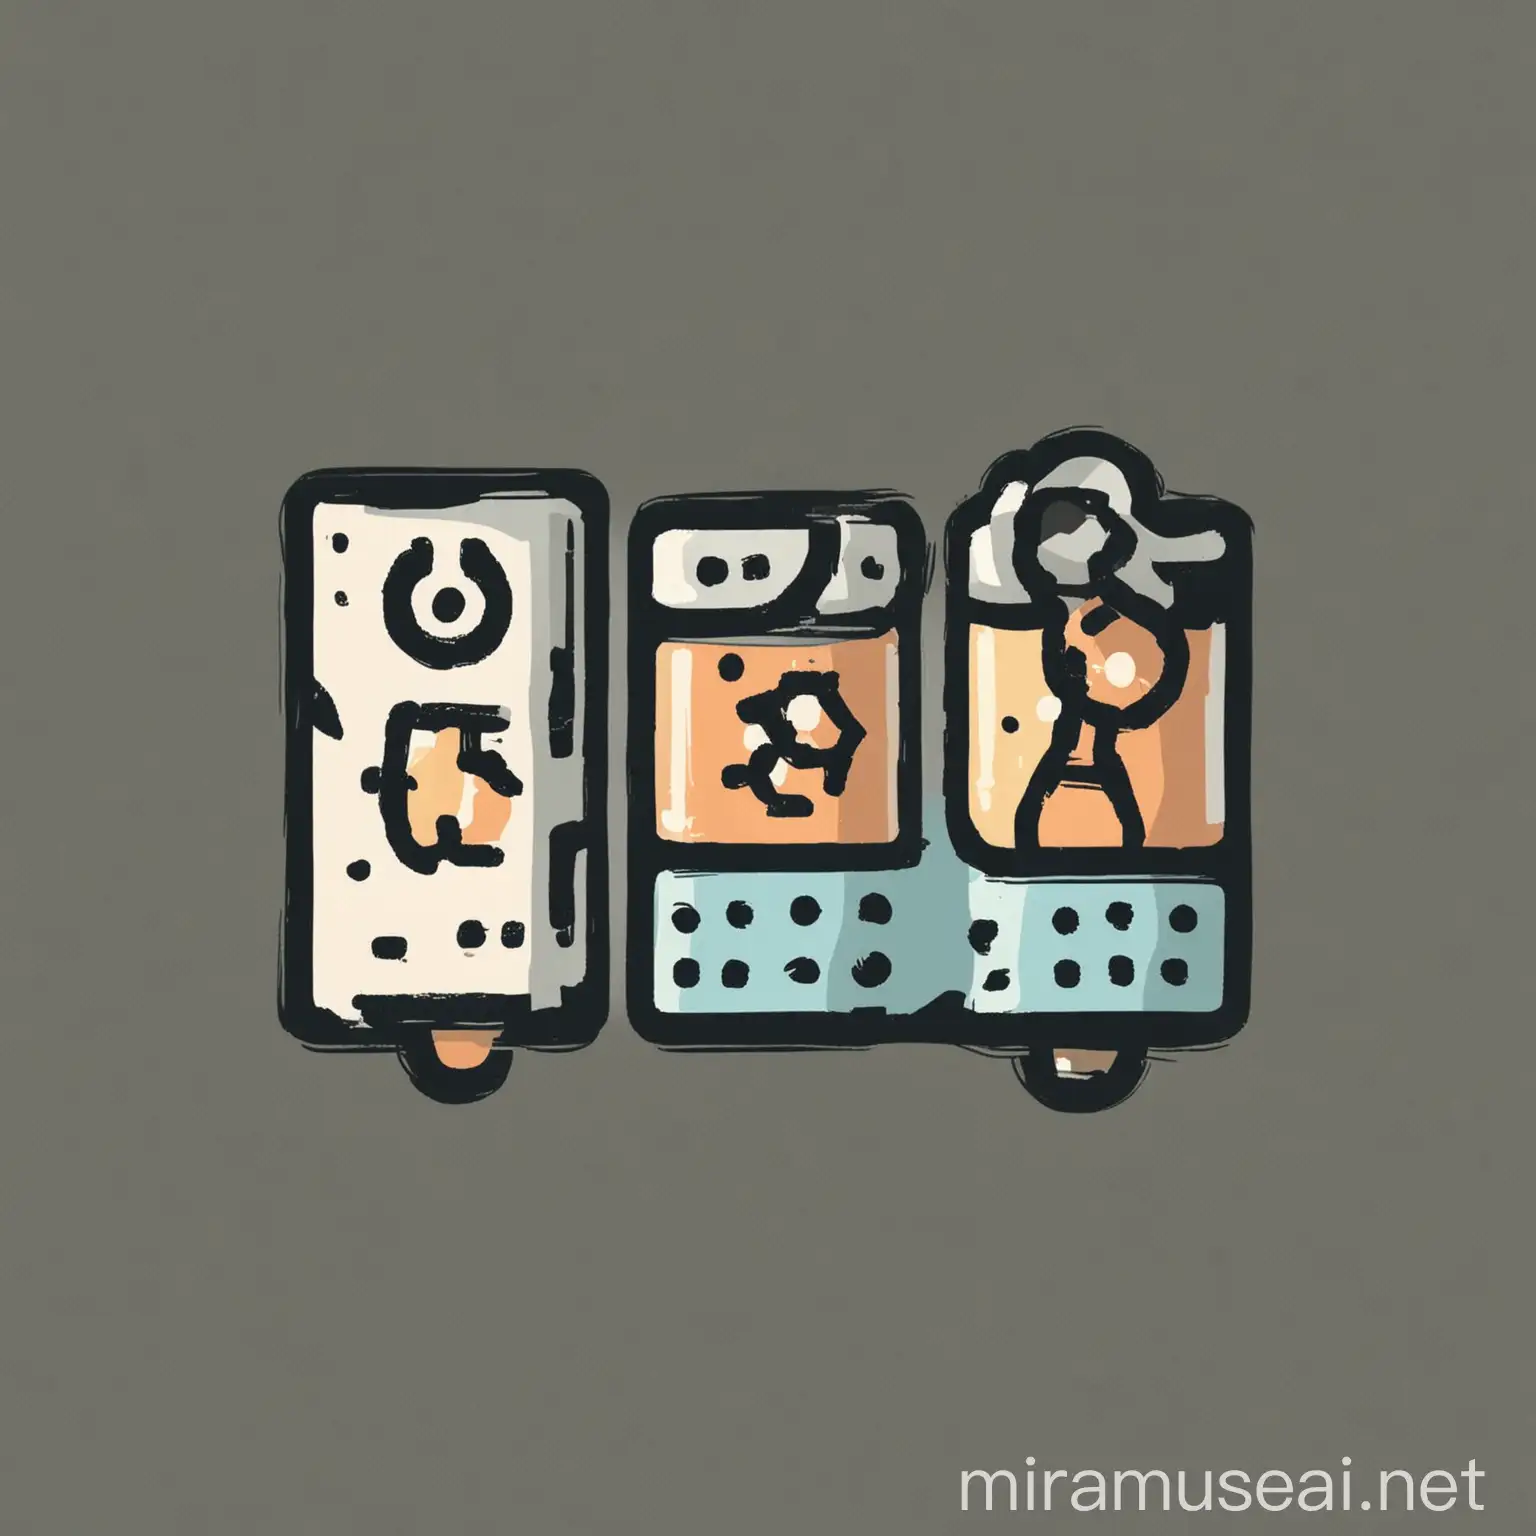 Research Process Icon in Four Colors